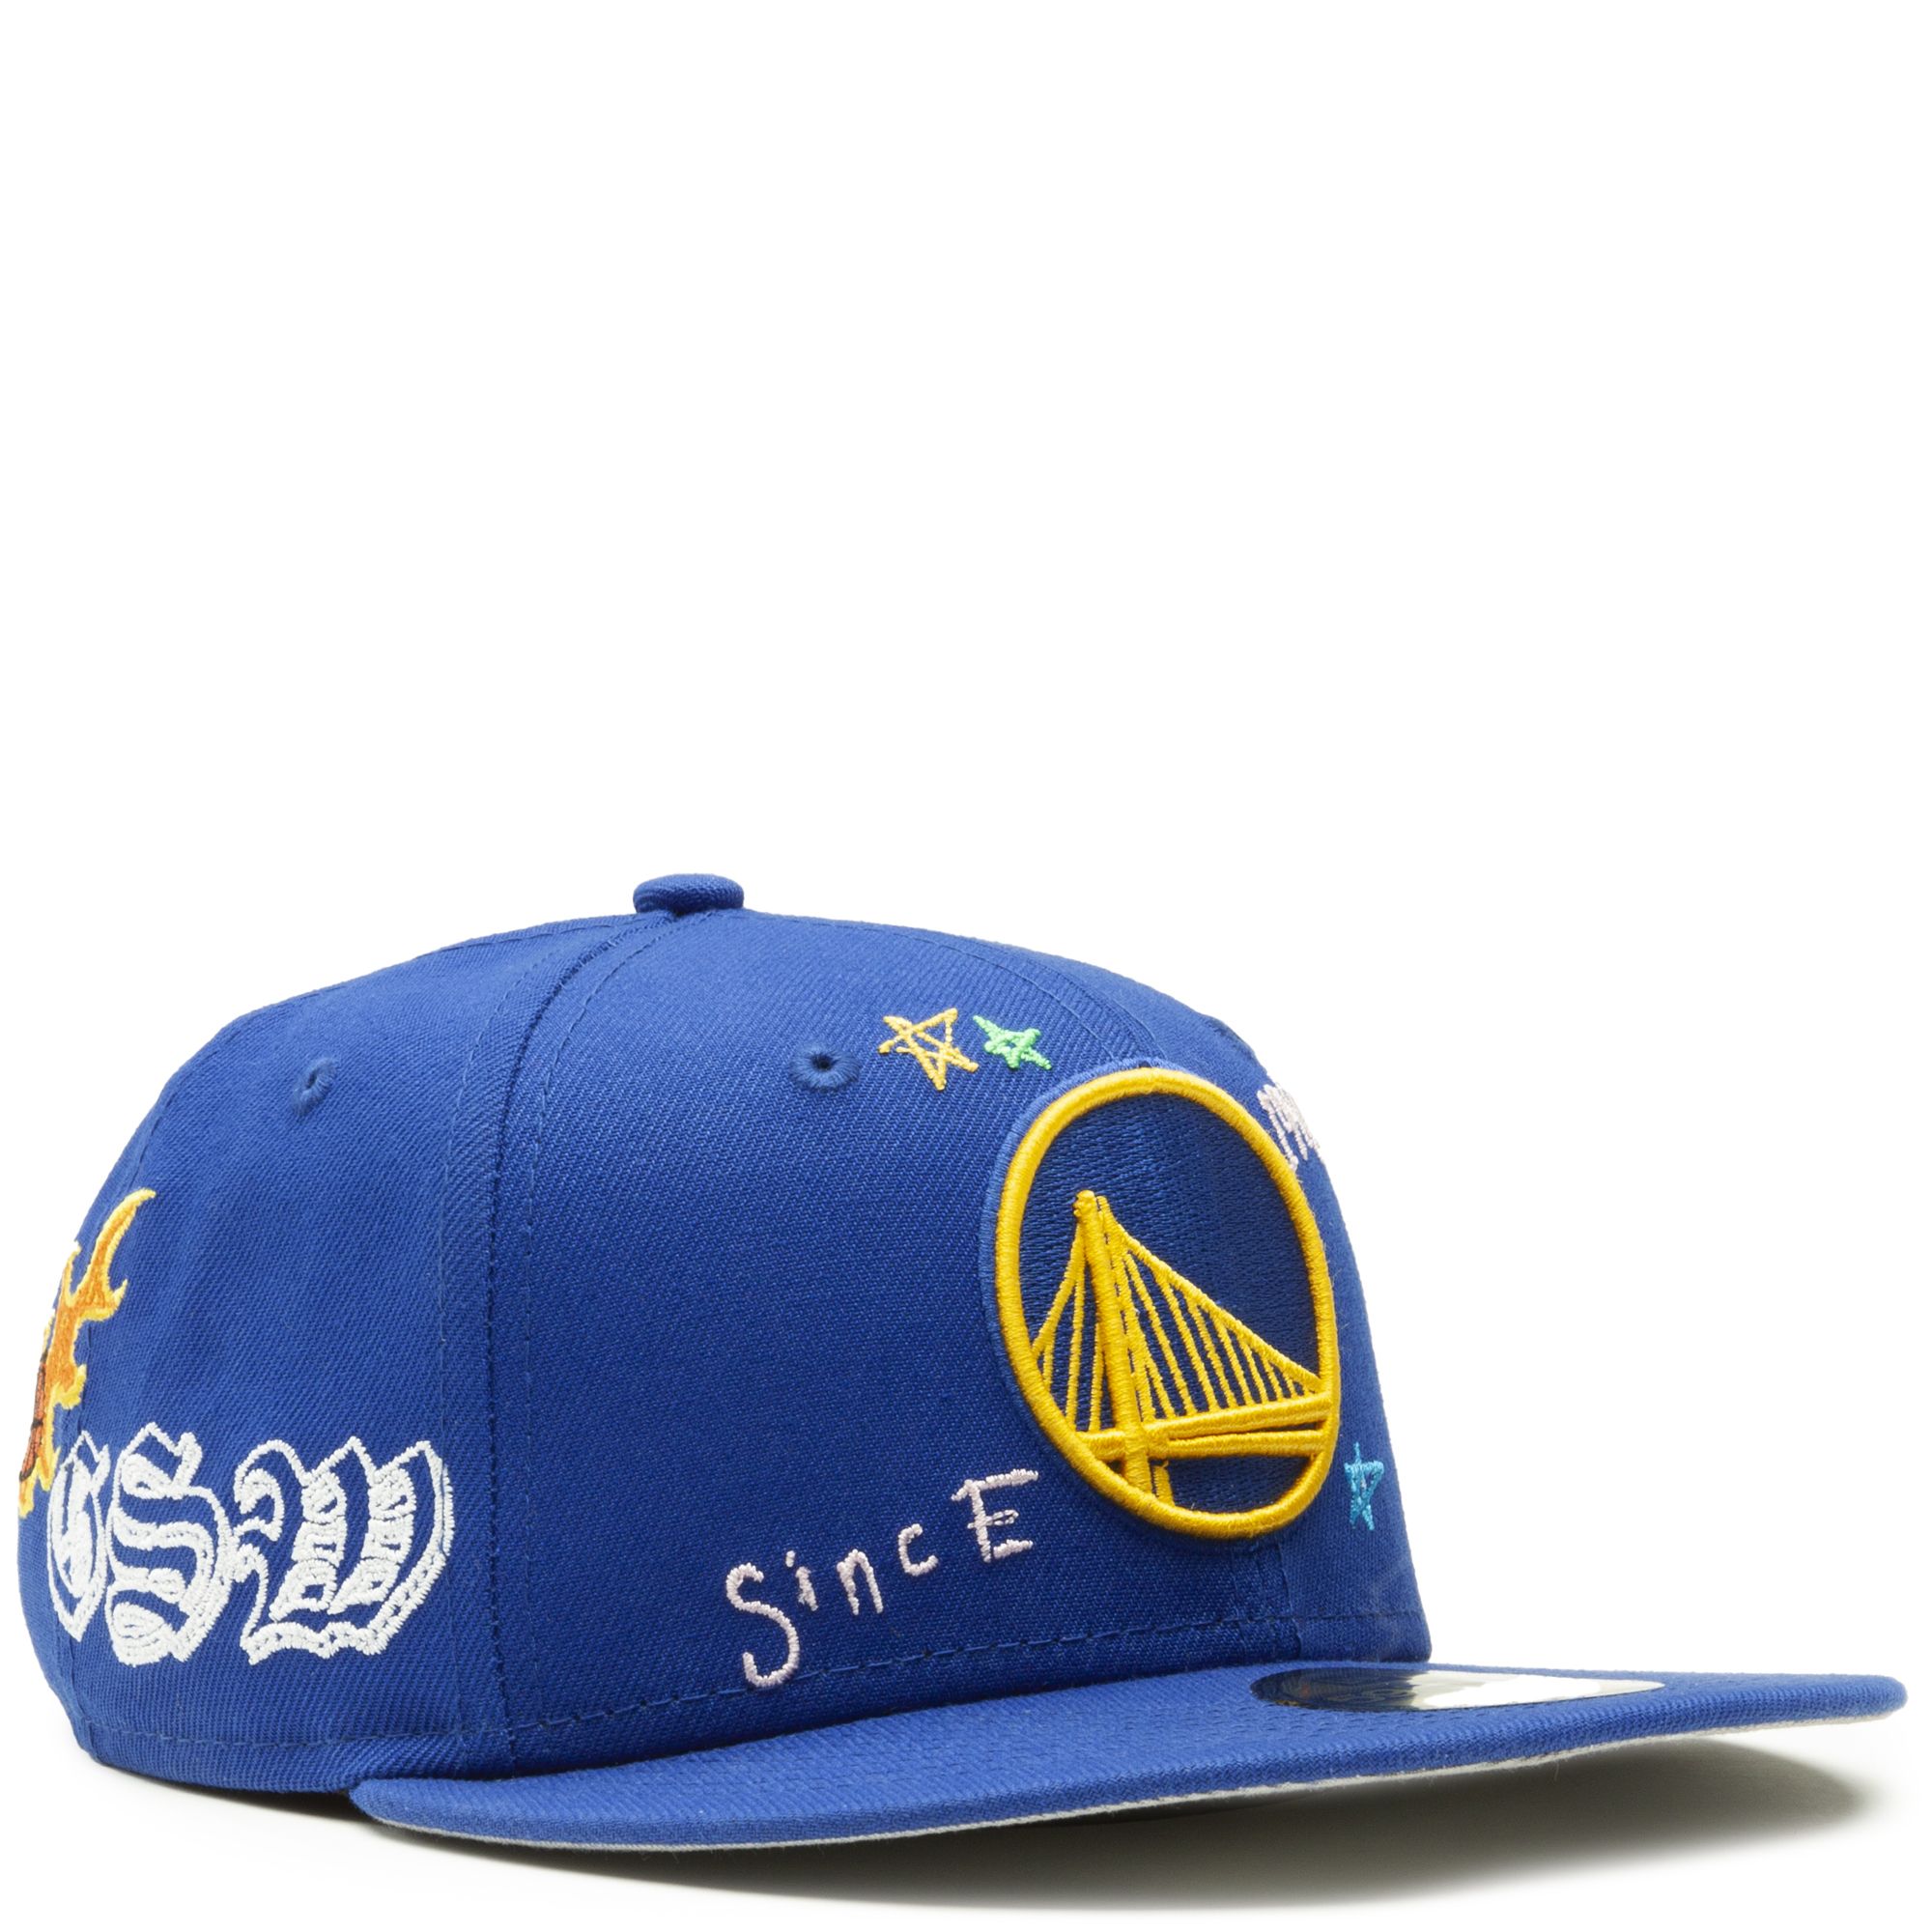 Youth Golden State Warriors New Era Light Blue/Neon Green Two-Tone